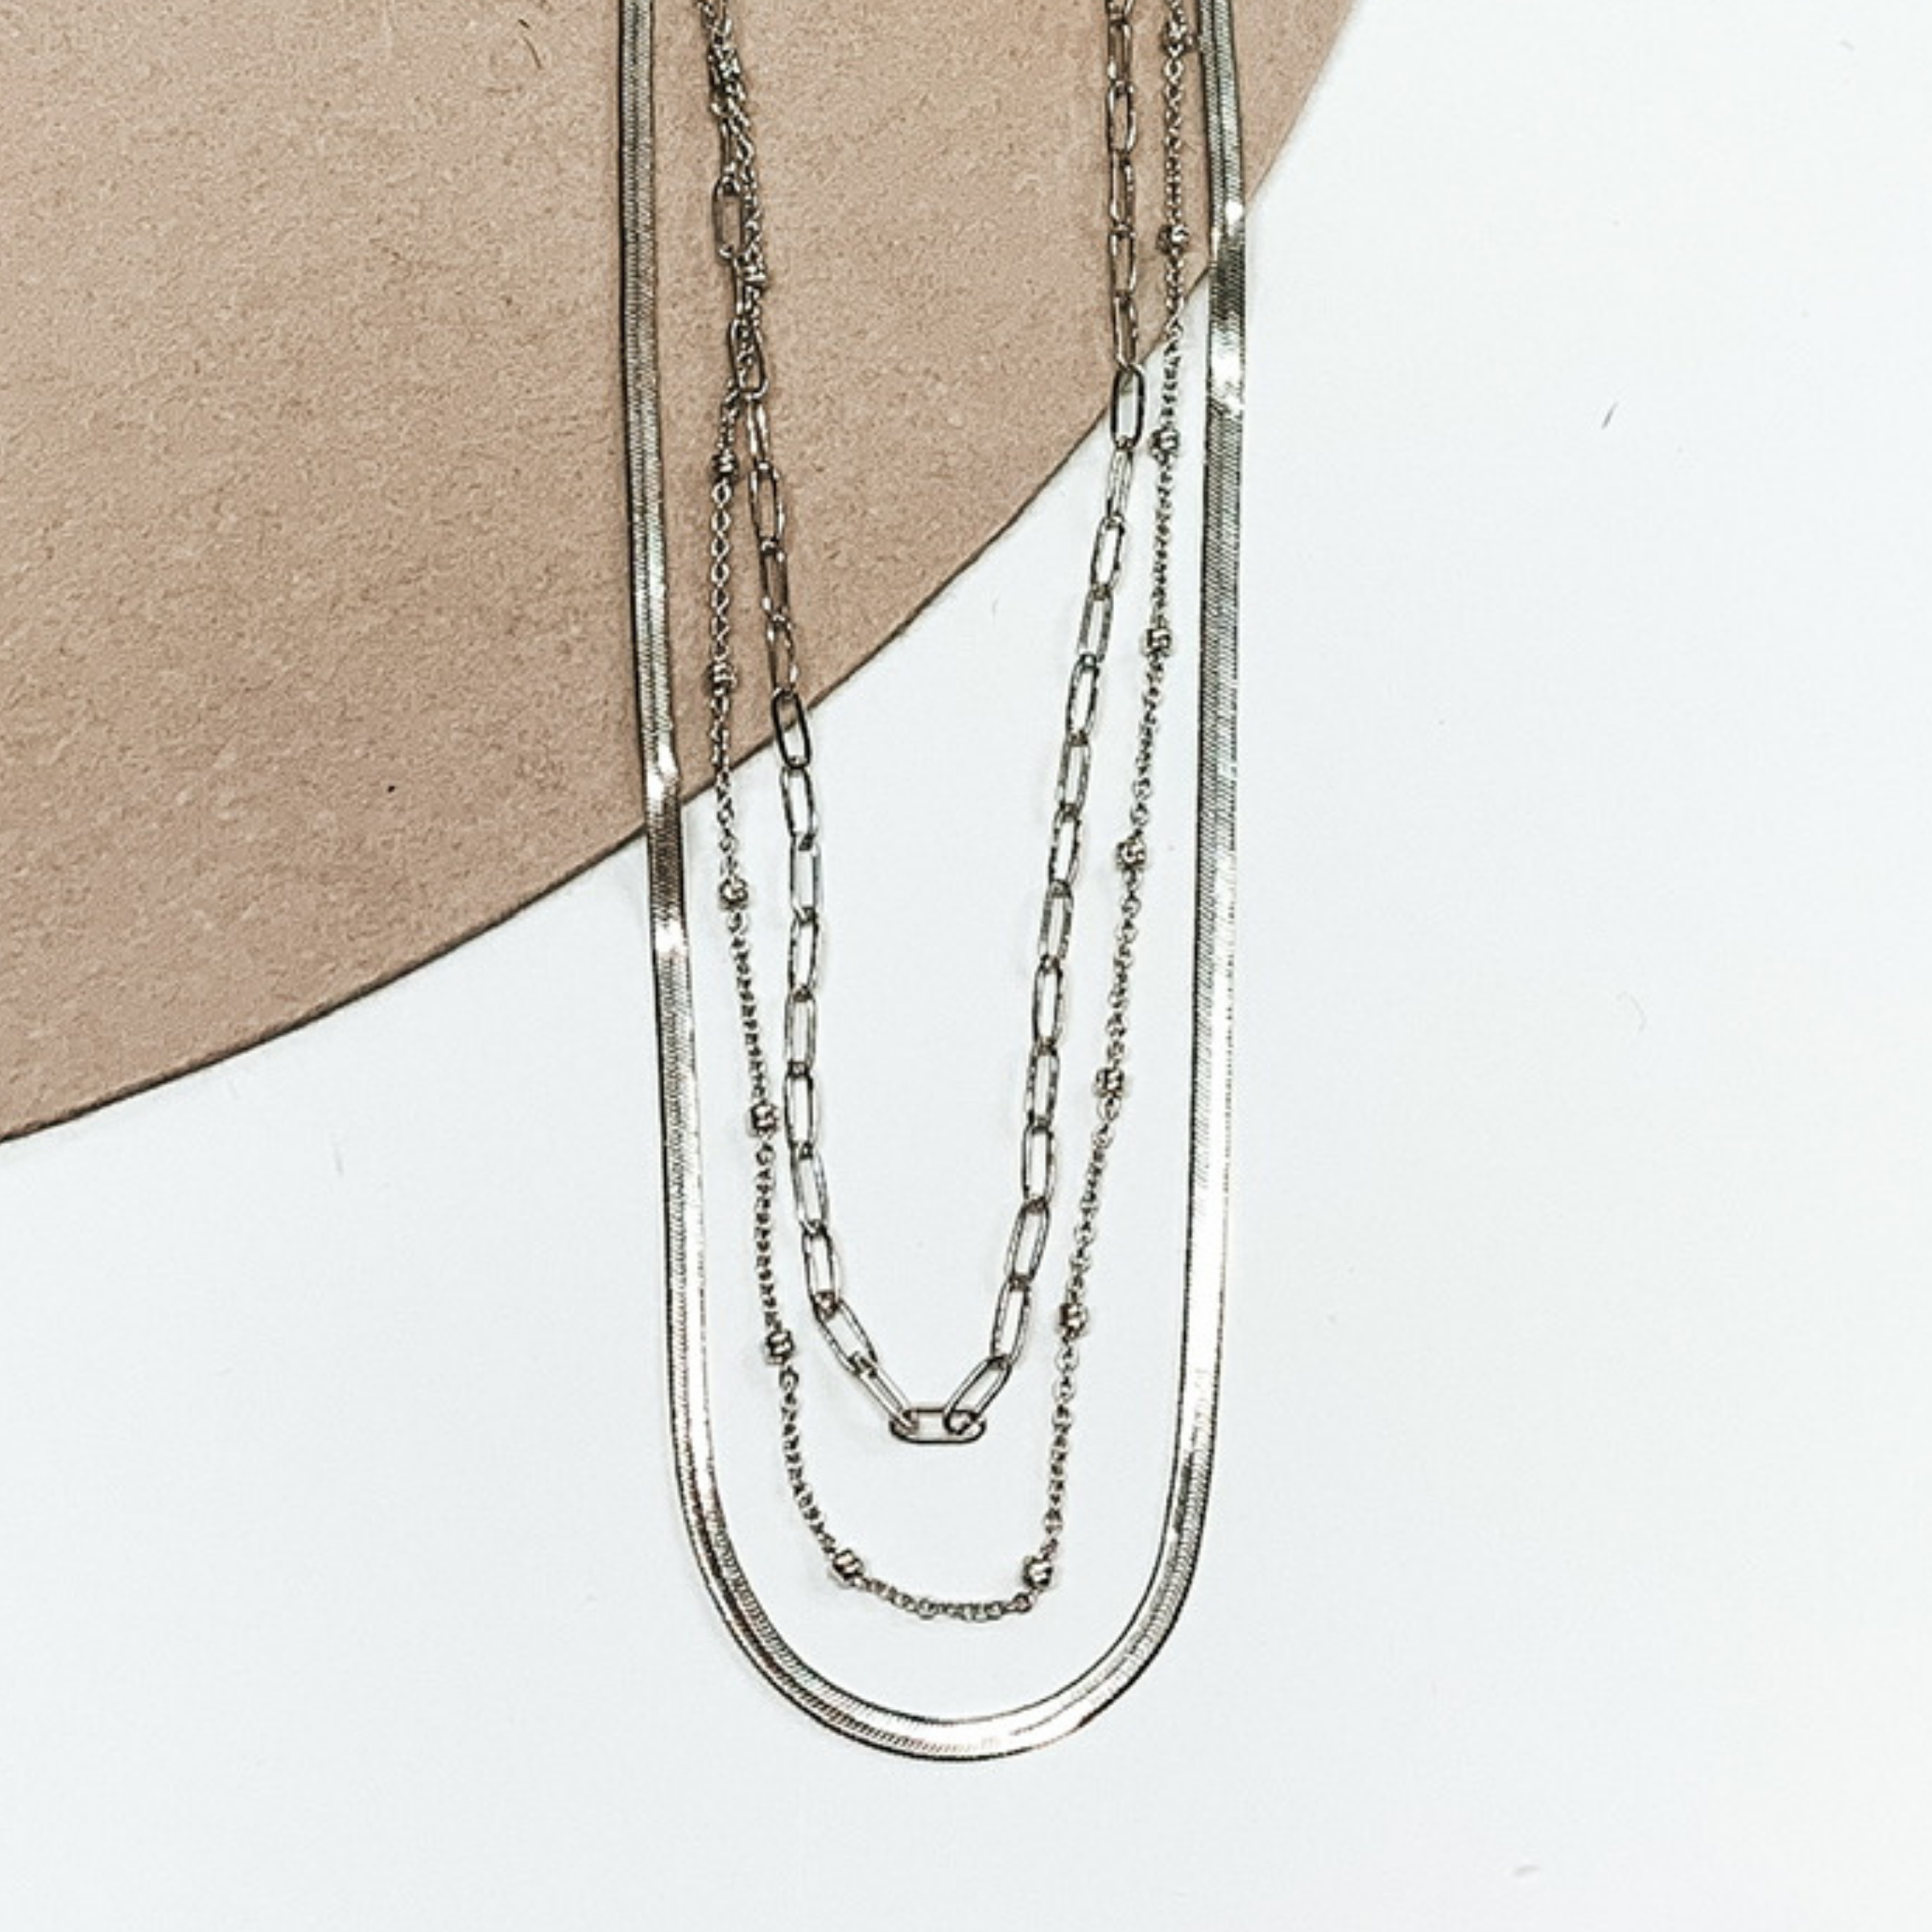 This silver necklace has three different chains. The first one is a classic thin link chain strand, the next one has tiny silver bead spacers, and the last one is a flat herringbone chain. This necklace is pictured on a white and beige background. 